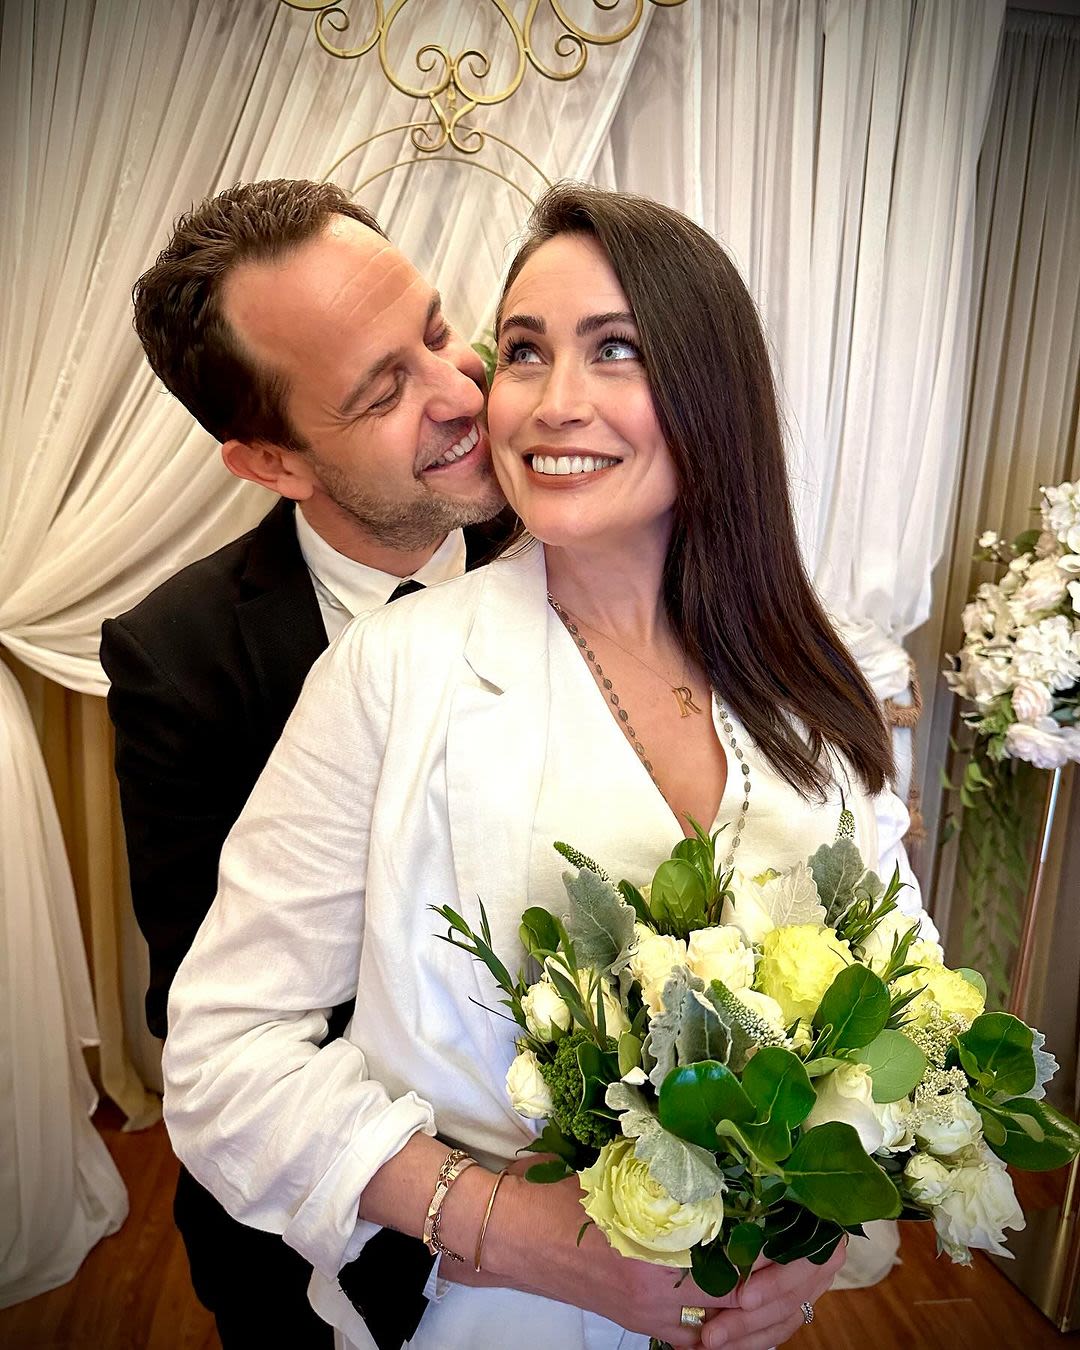 General Hospital’s Rena Sofer Is Happily Remarried to Sanford Bookstaver! Meet Her Husband